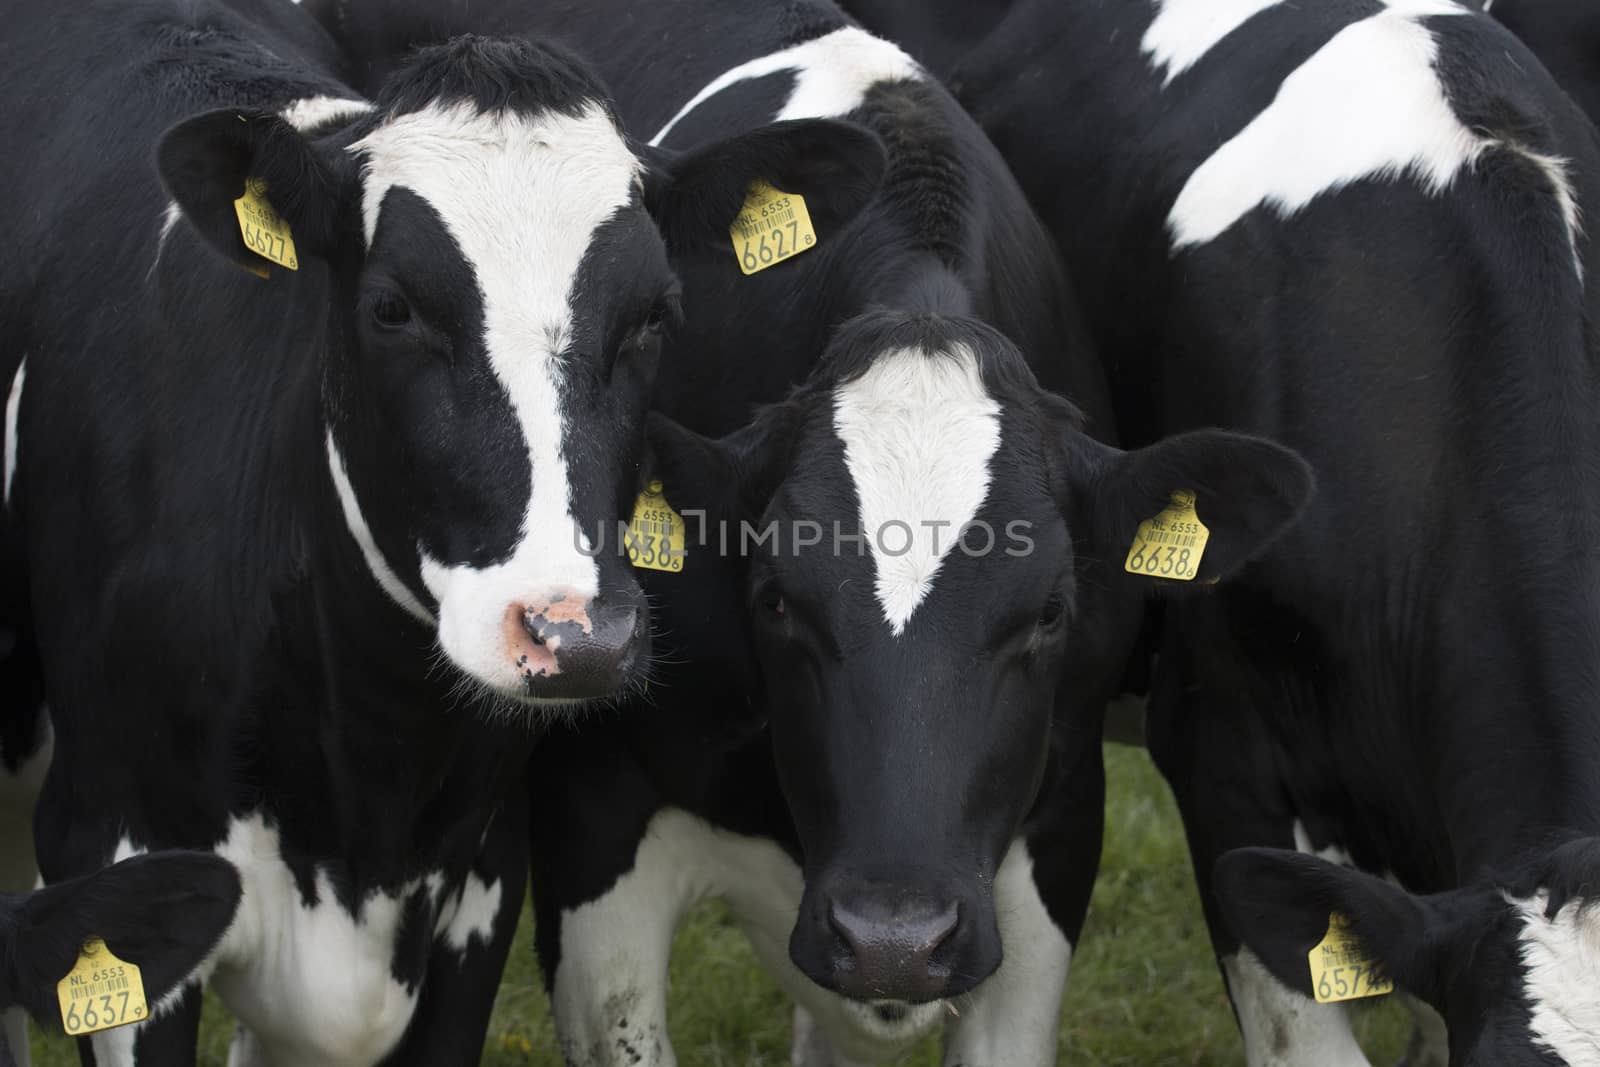 Black and white cows